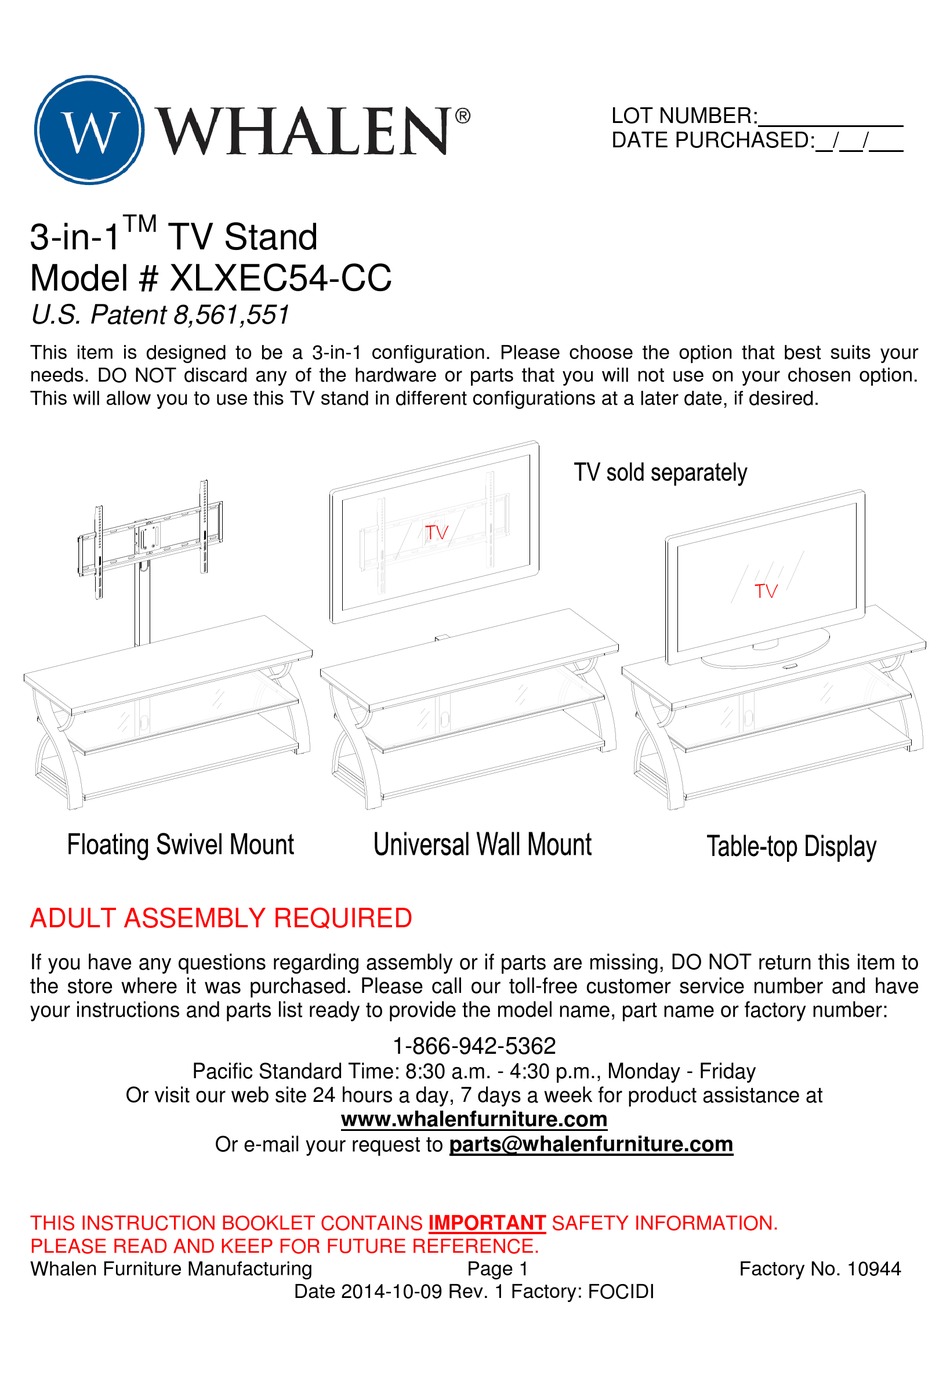 WHALEN 3-IN-1 TV STAND INSTRUCTION MANUAL Pdf Download ...